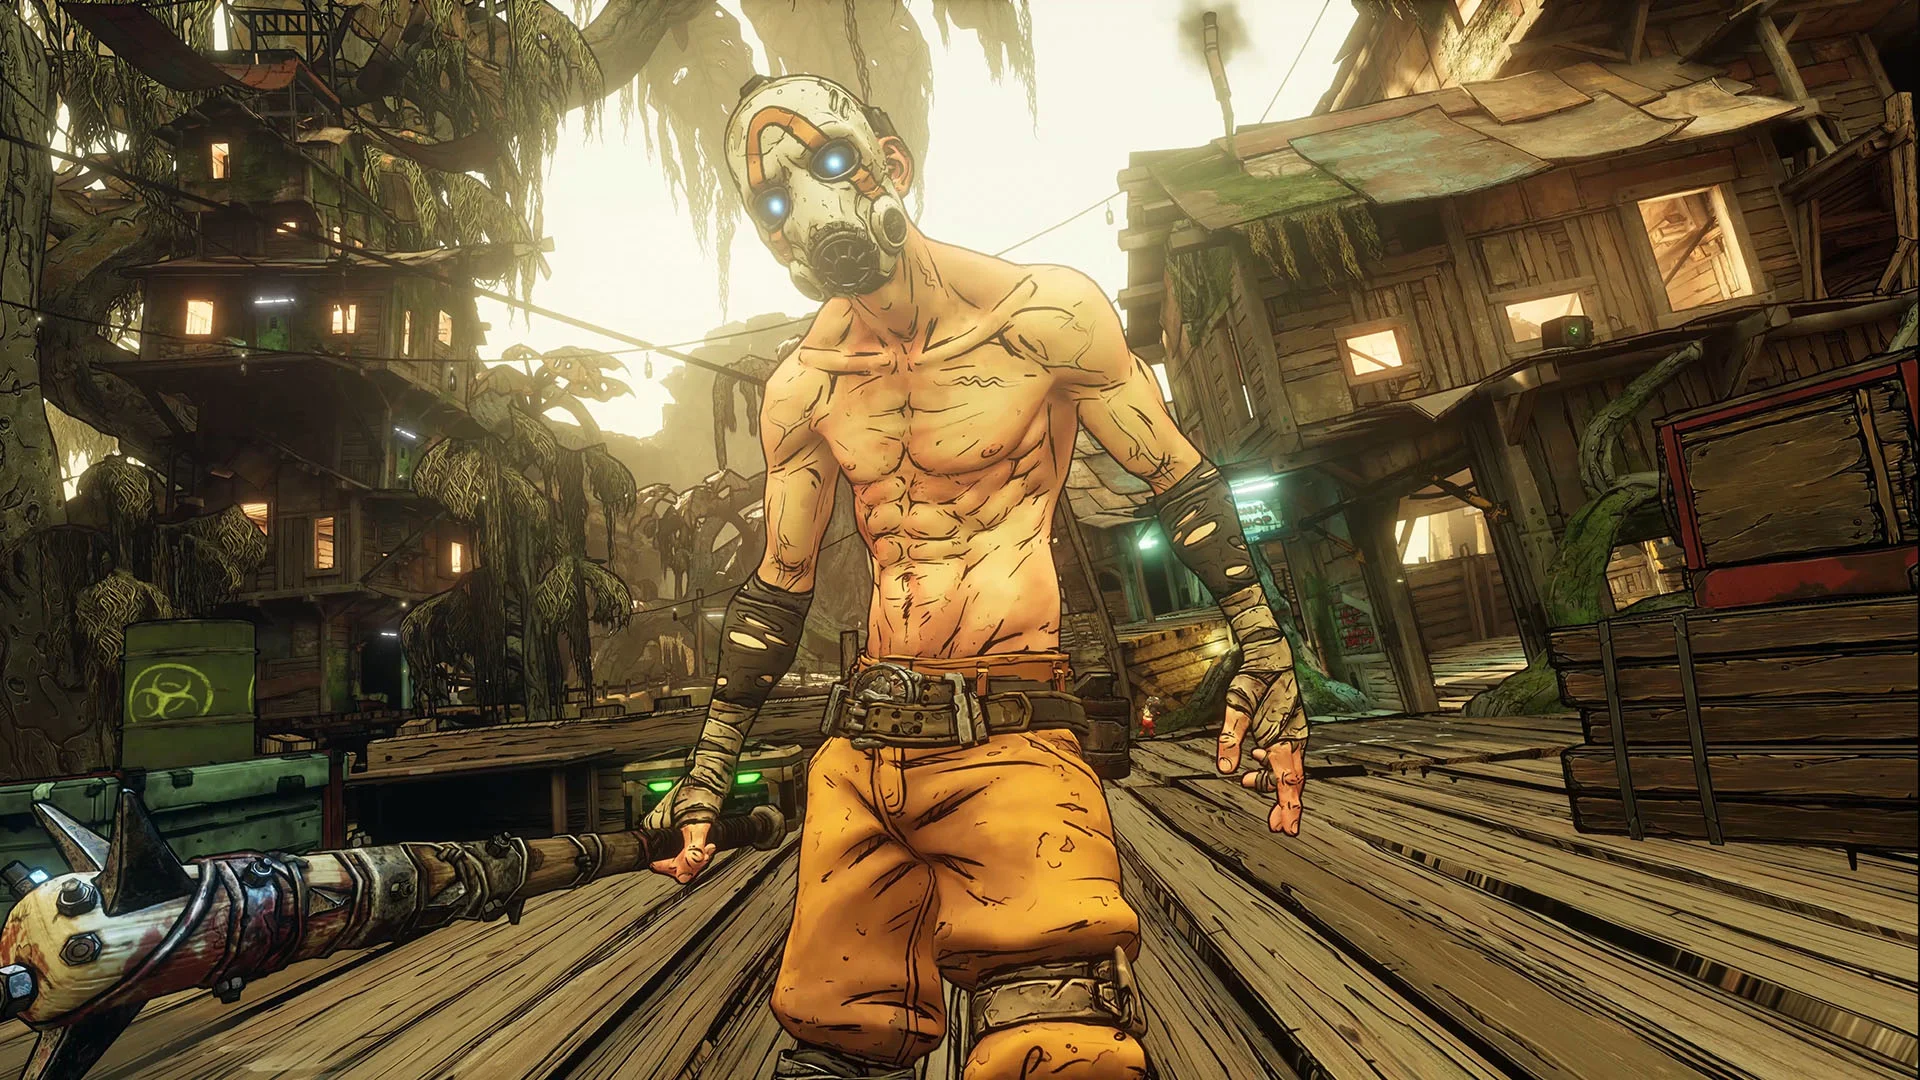 The release date of the film based on the Borderlands series has become known